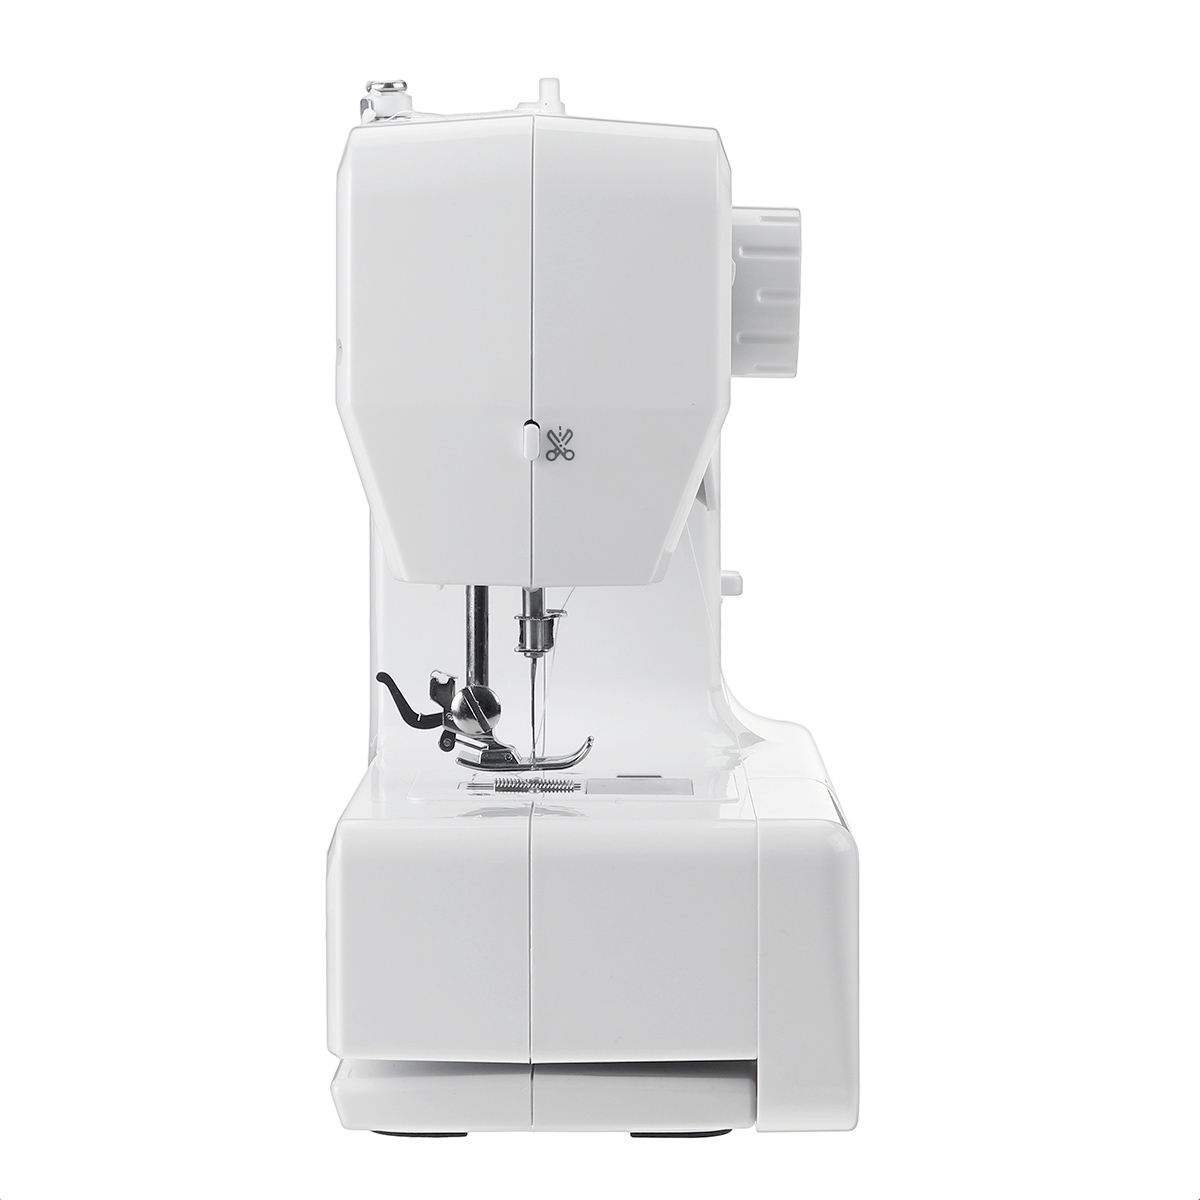 Mini-Desktop-Electric-Sewing-Machine-12-Stitches-Household-Tailor-DIY-Clothes-1697247-6